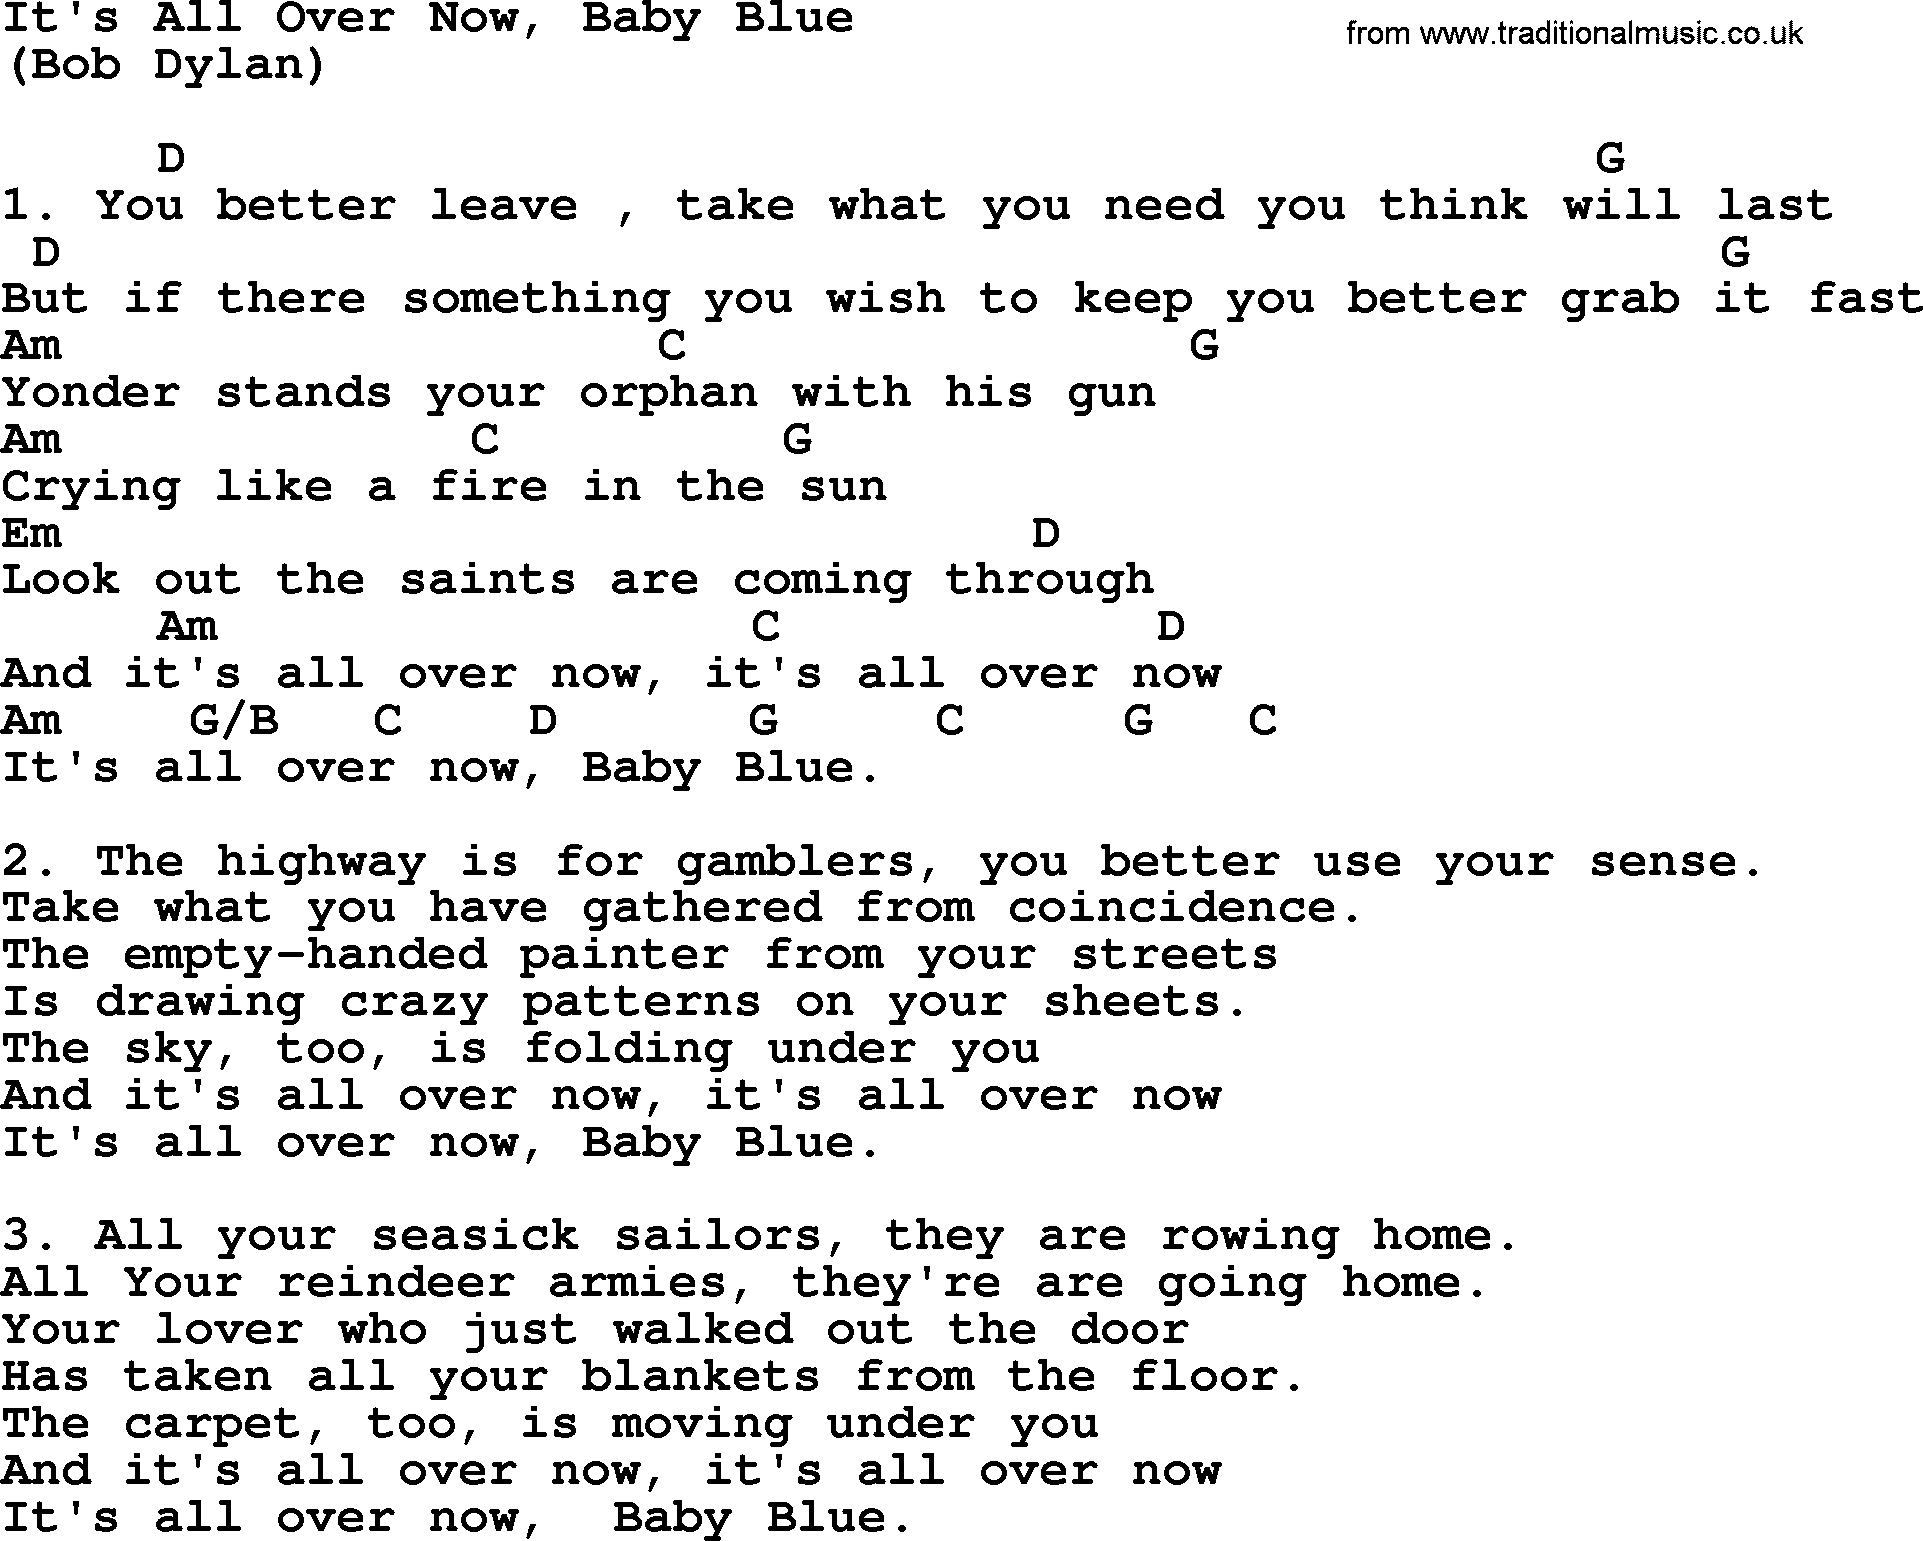 The Byrds song It's All Over Now, Baby Blue, lyrics and chords